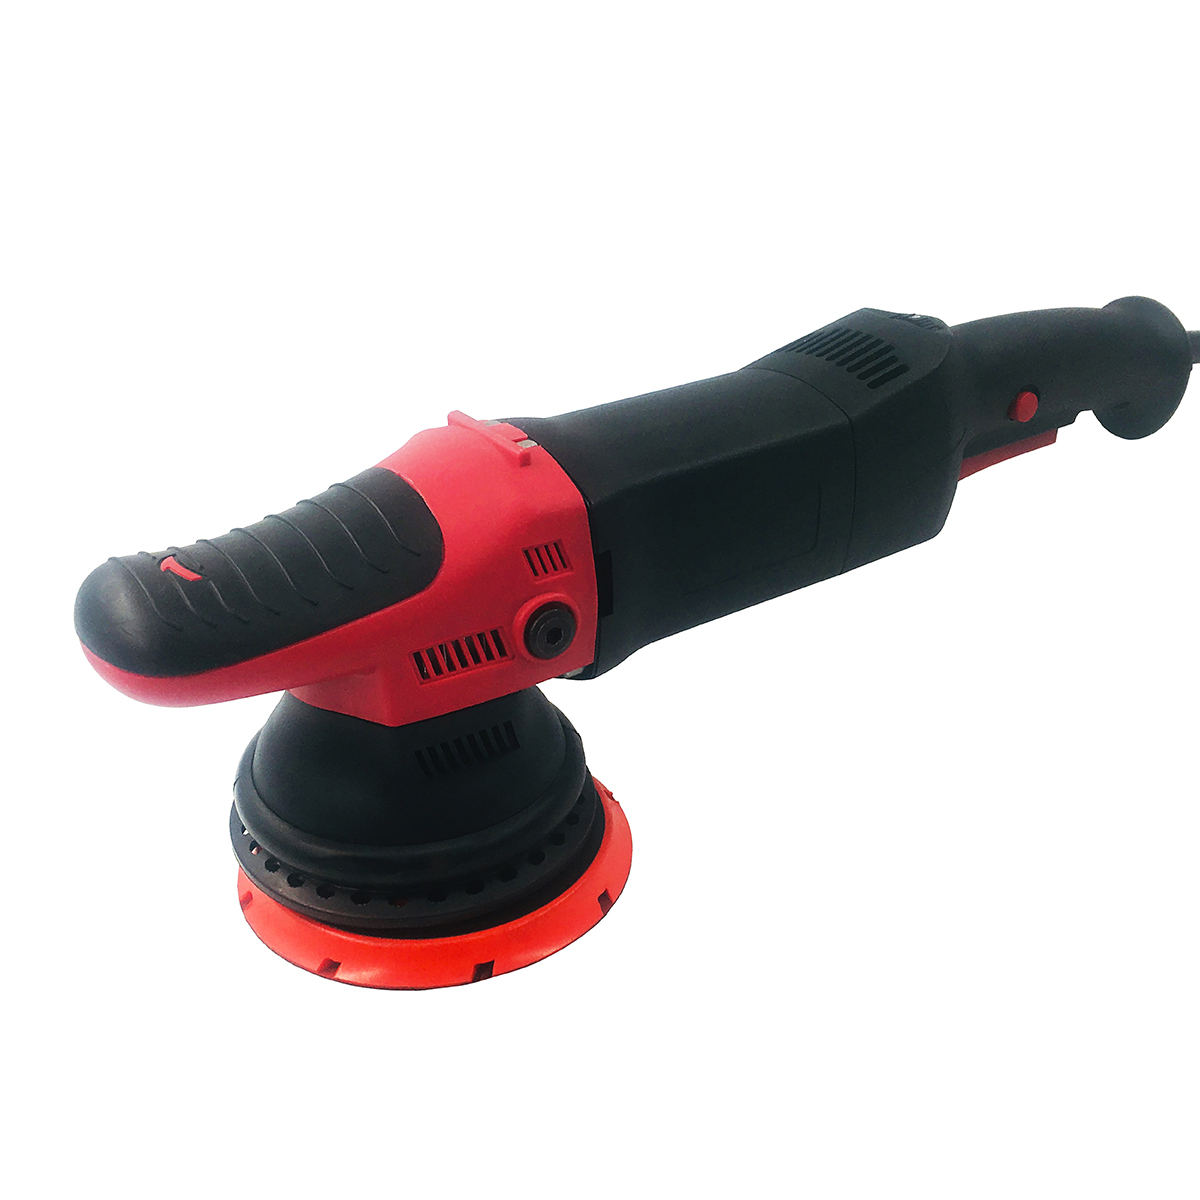 900w 15mm Car Paint Polisher Dual Action Power Tools Small Hand Held Car Polisher Electric